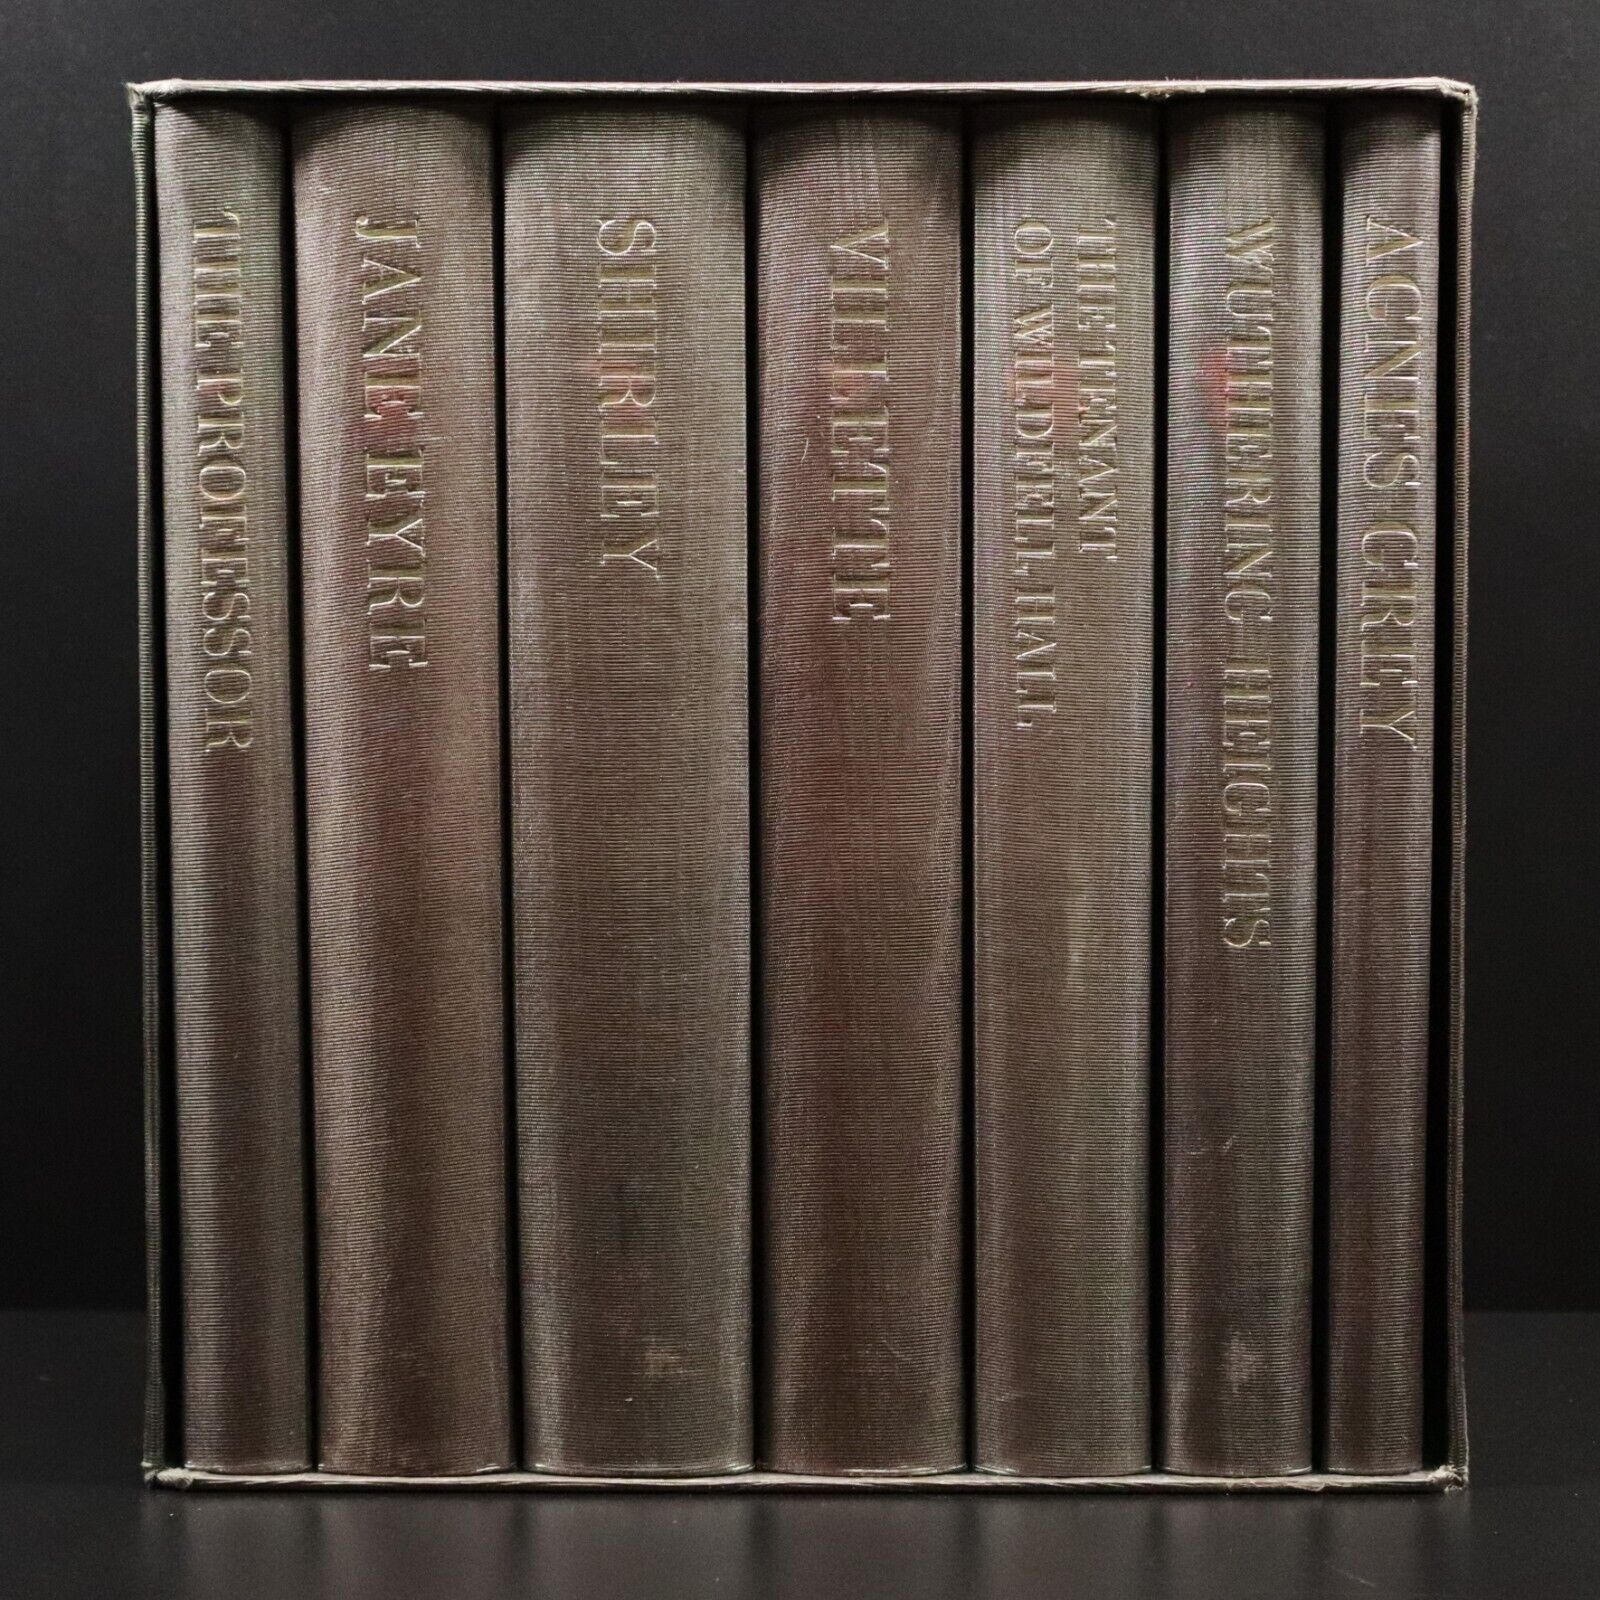 1993 7vol The Bronte Sisters Complete Novels Folio Society Fiction Book Set - 0